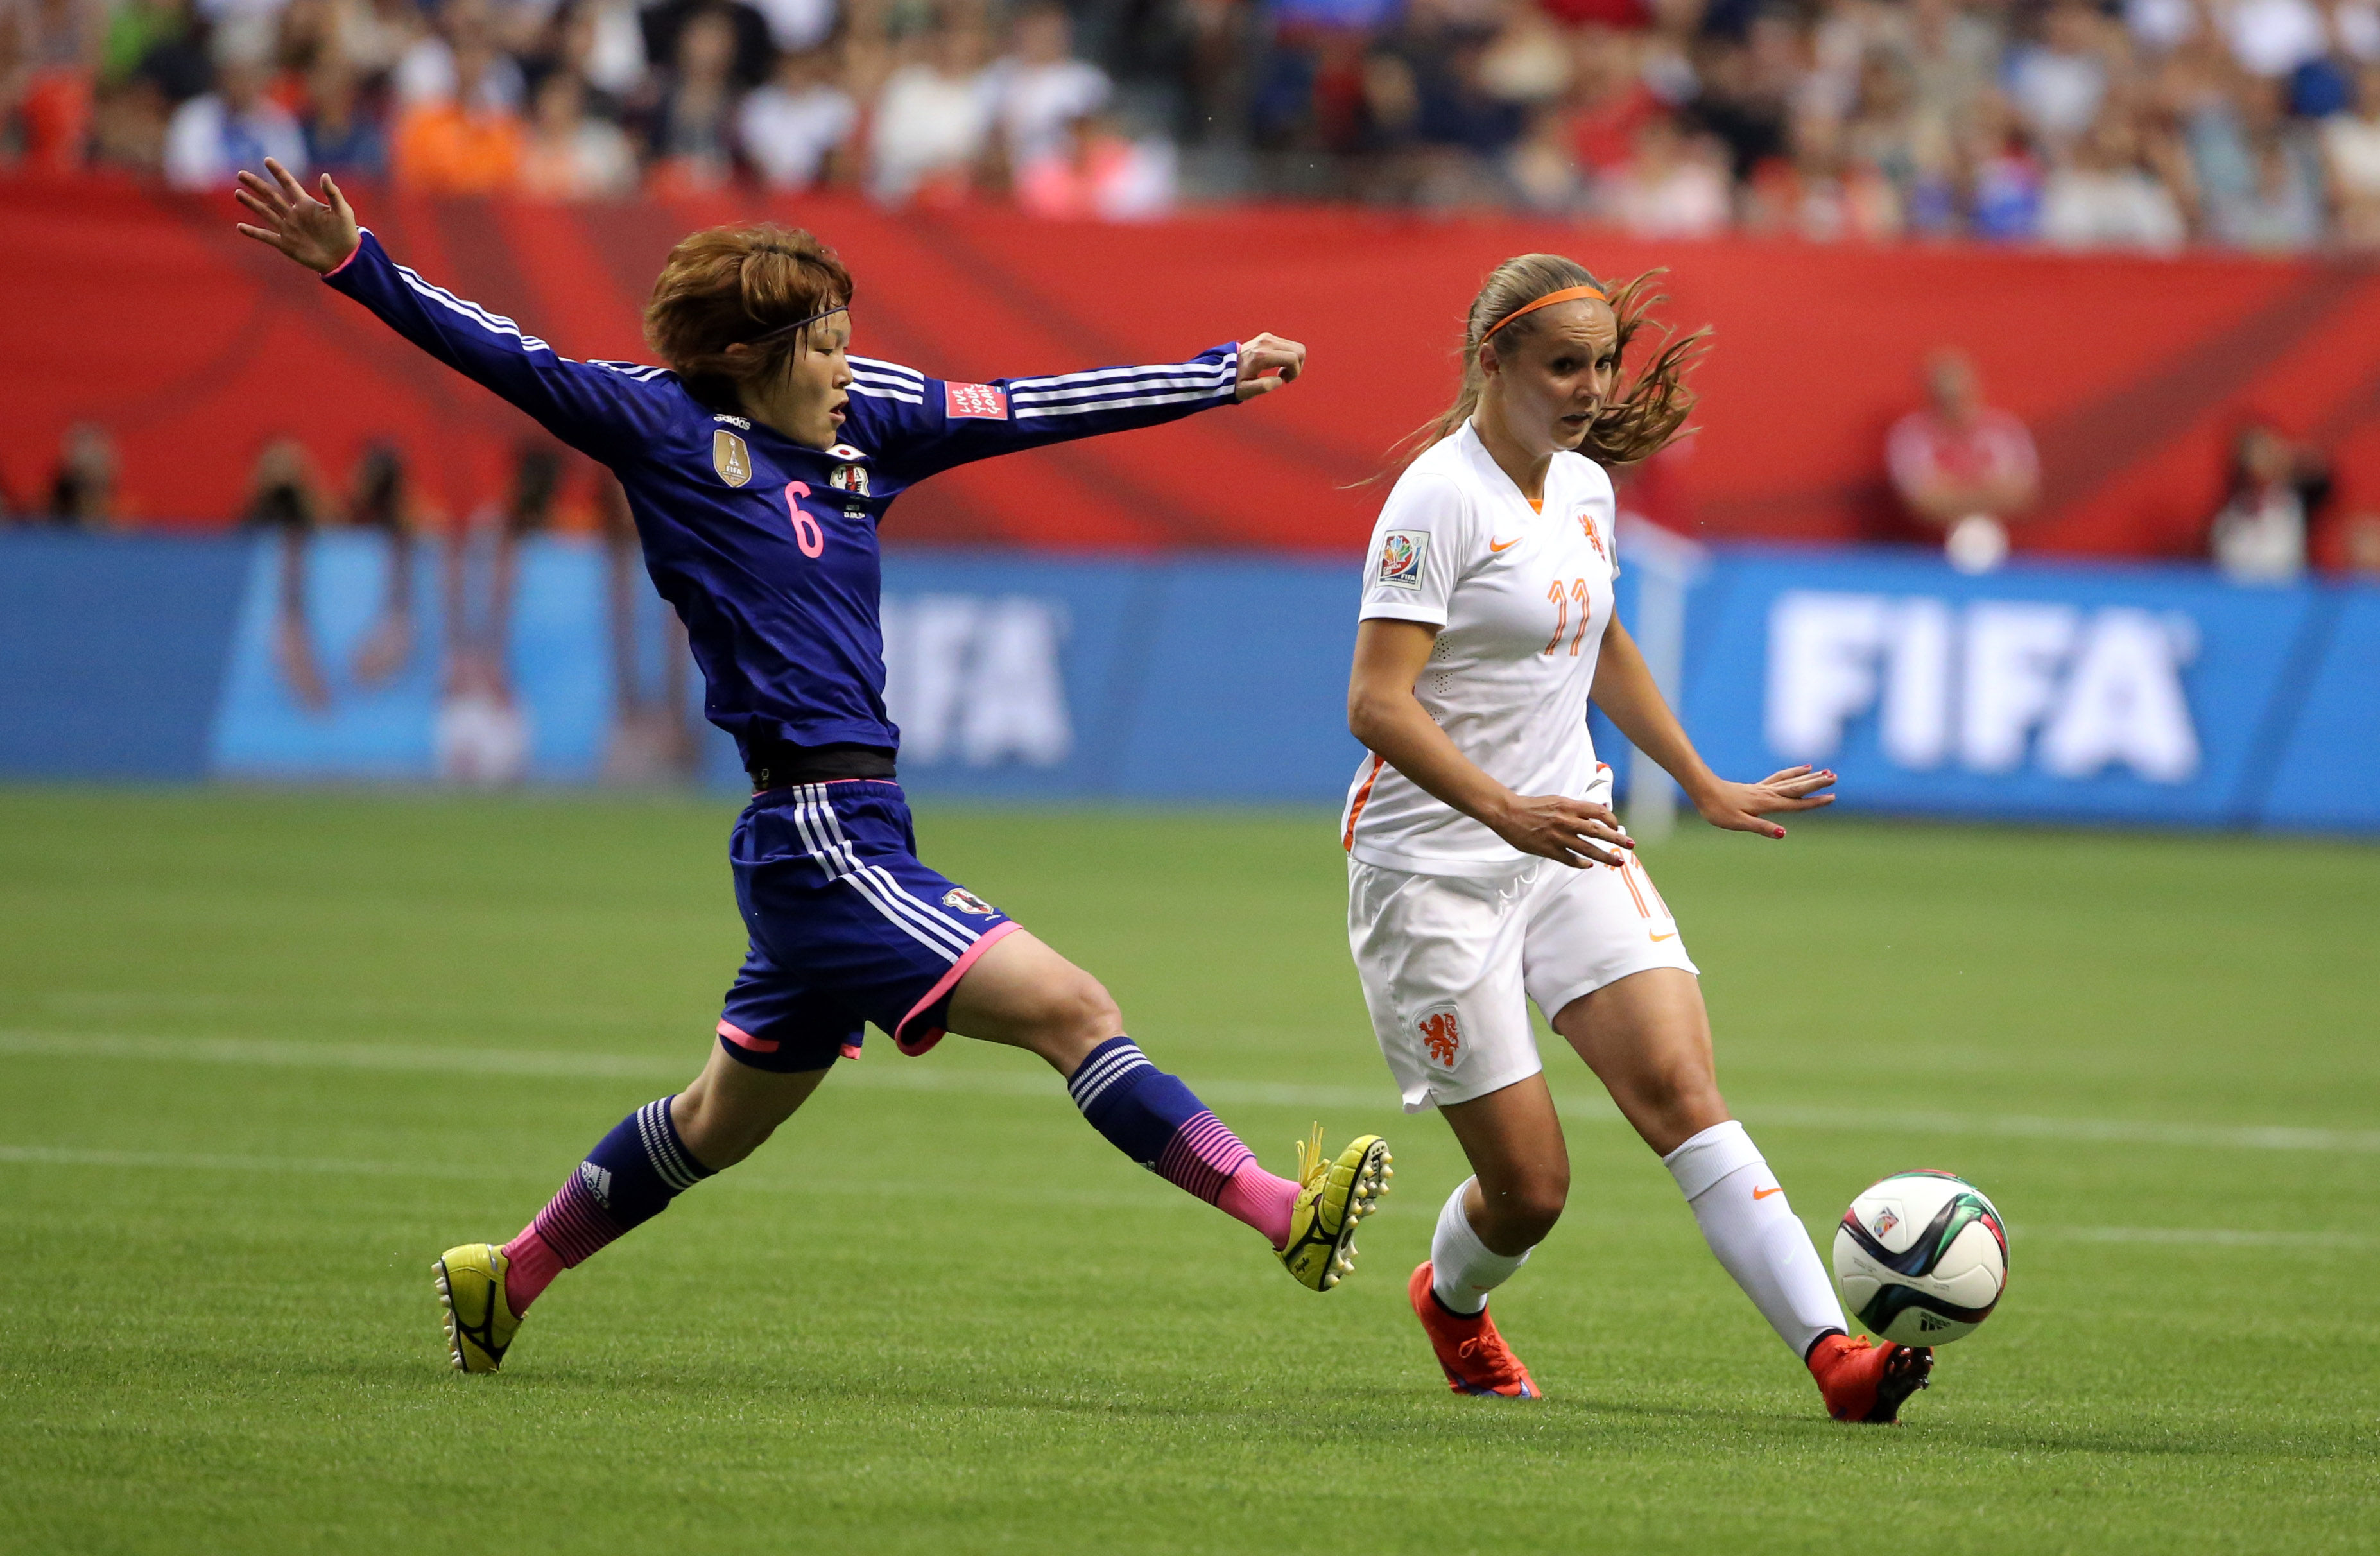 2019 Women’s World Cup: Getting to know Team Netherlands